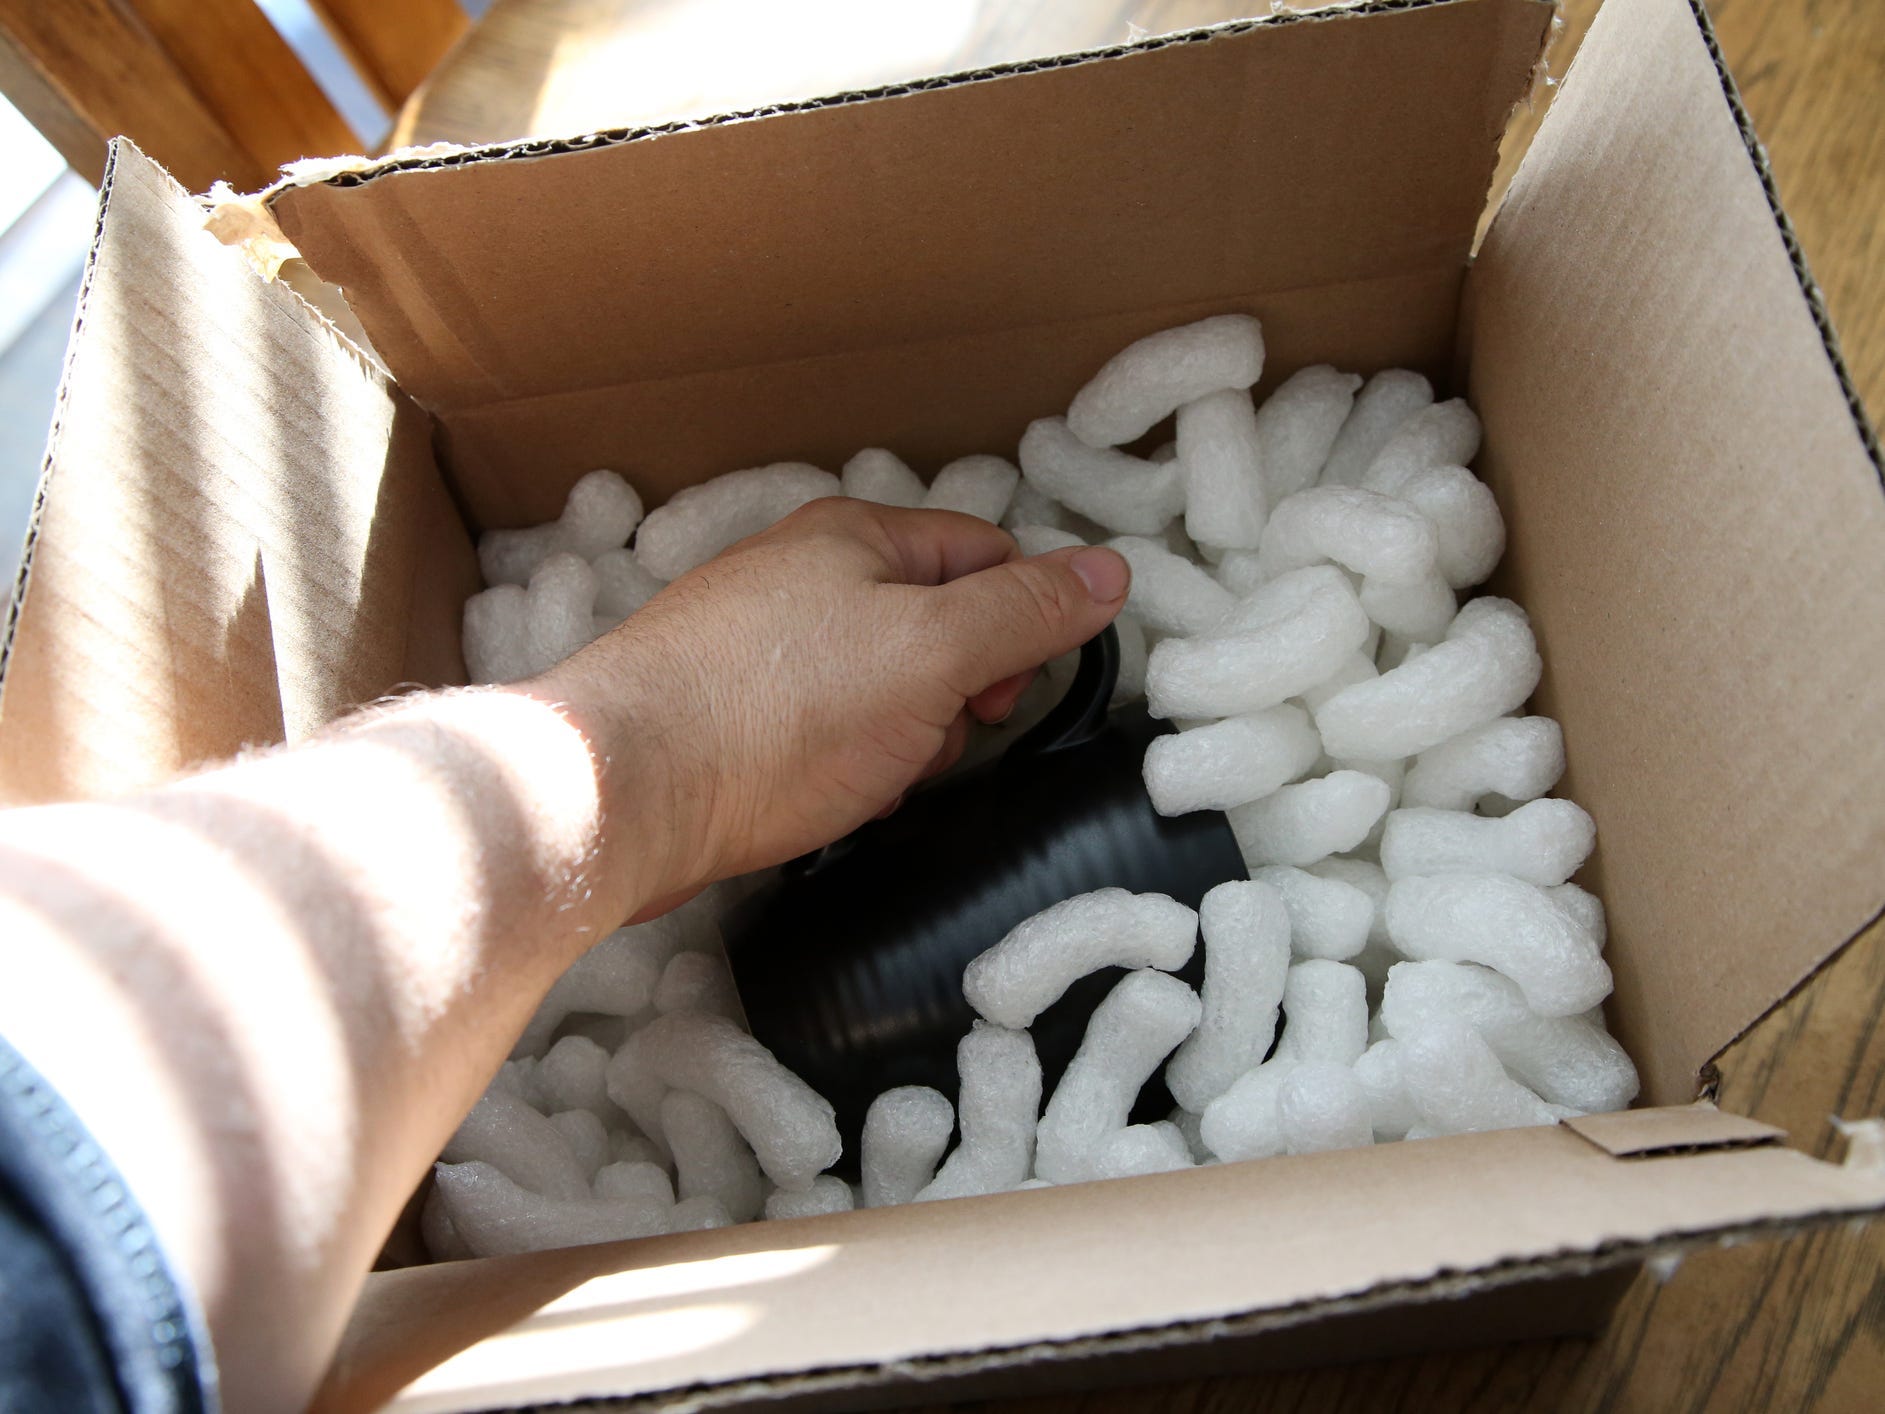 Person grabbing for a mug in a box with packing peanuts